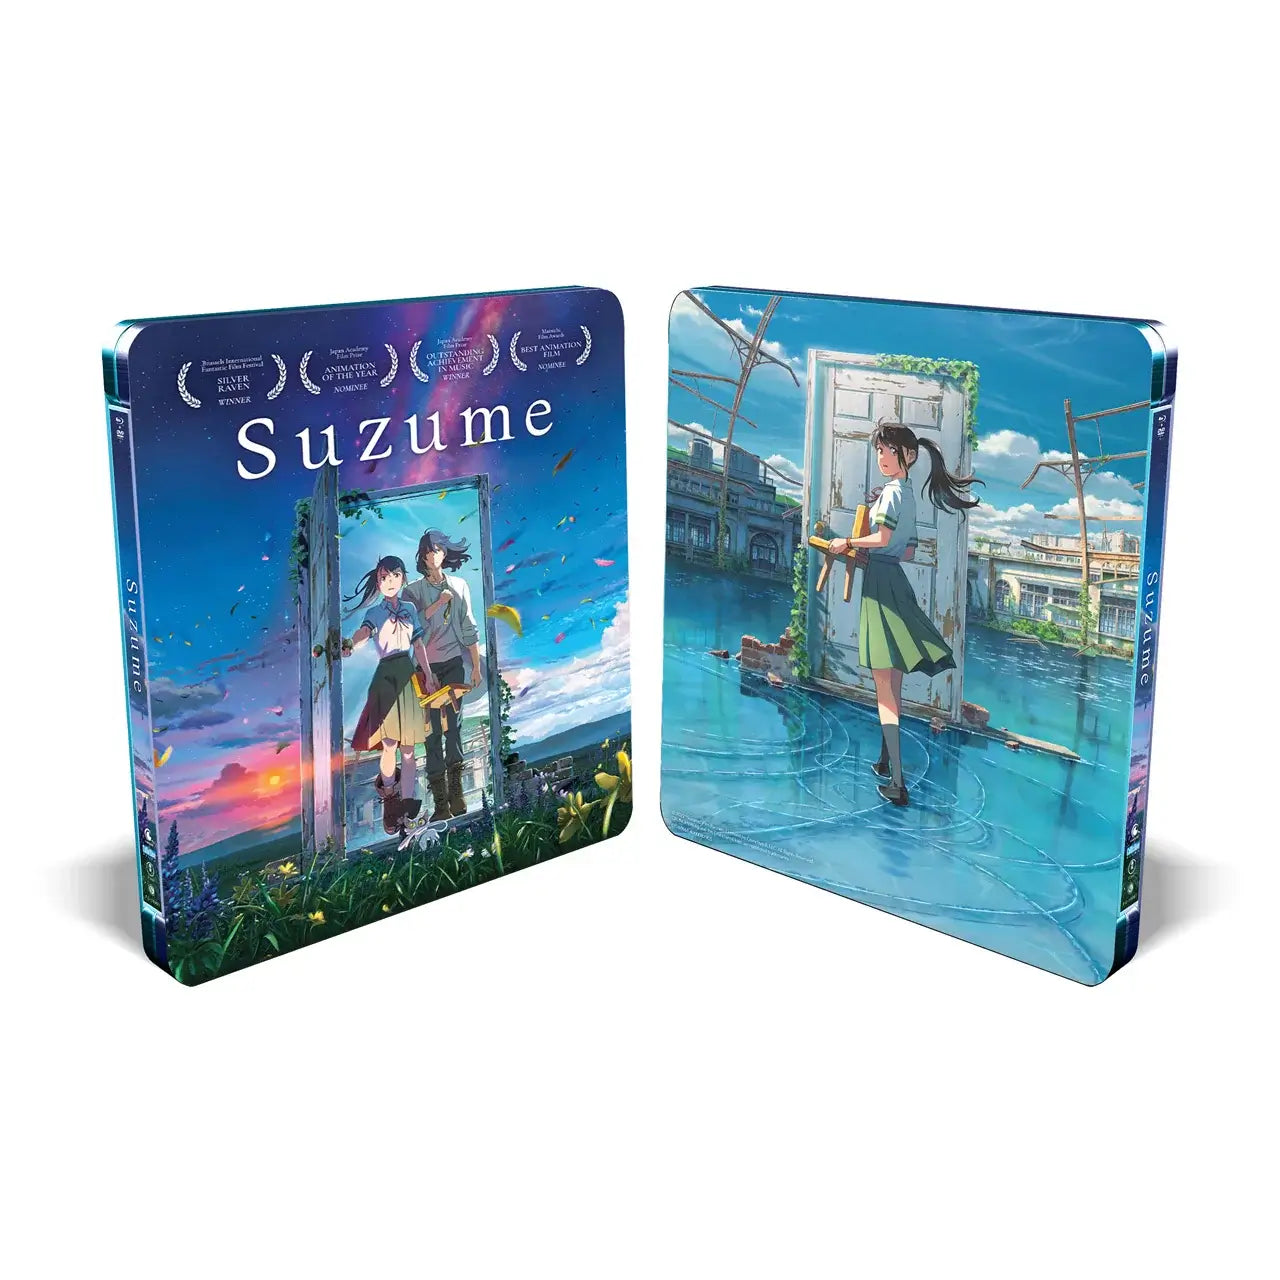 Suzume (blu-ray and DVD) Limited Edition Steelbook